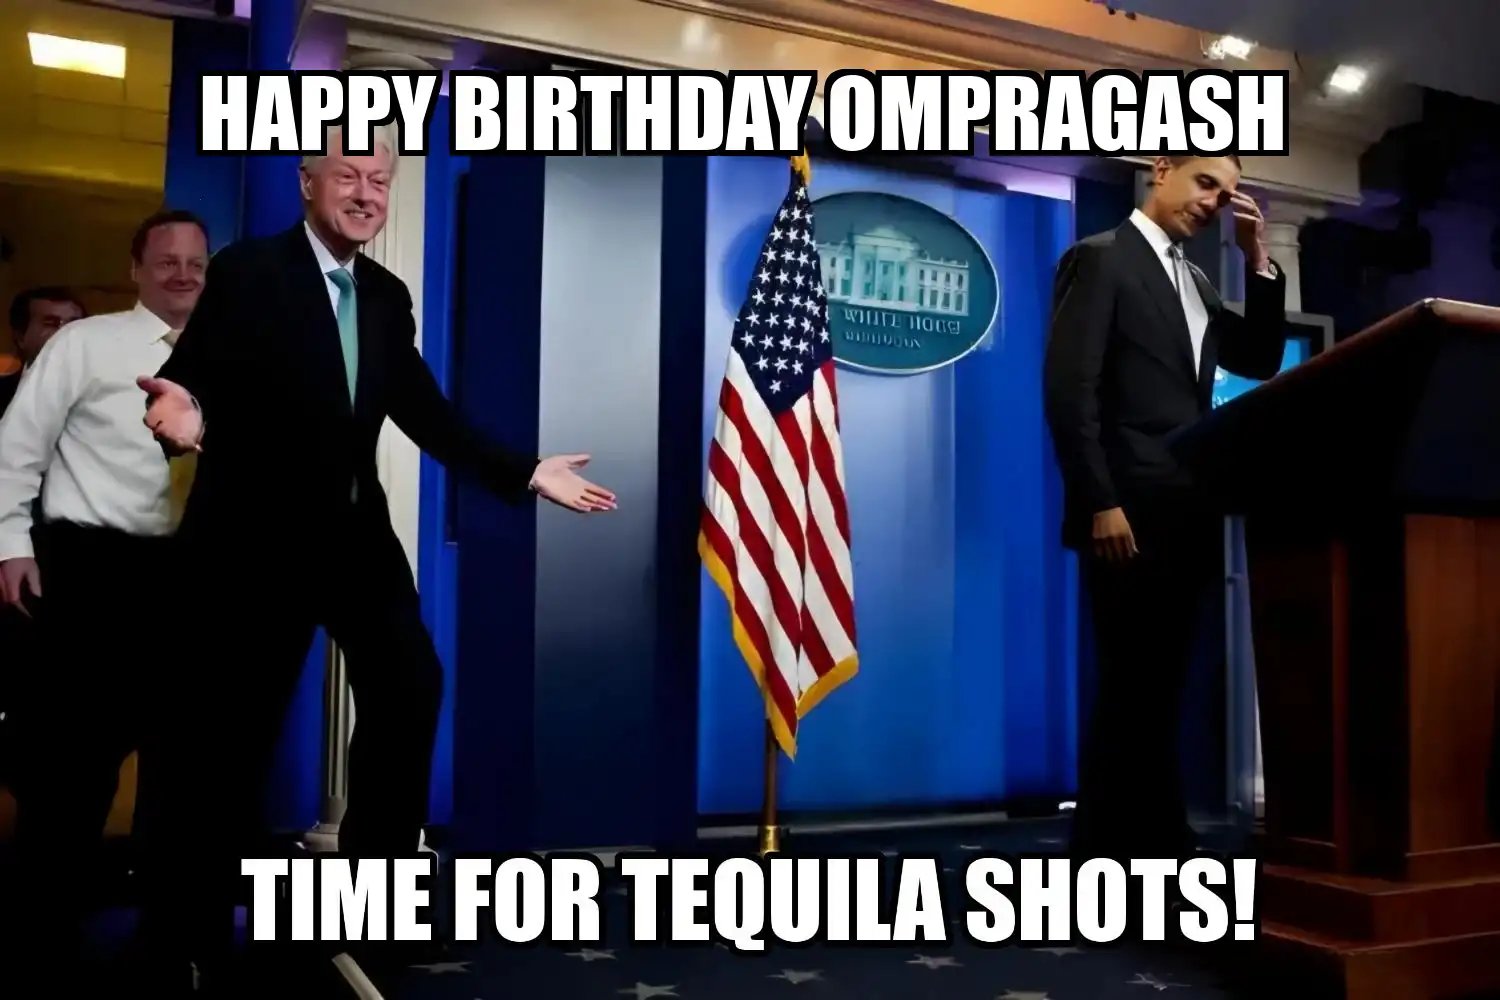 Happy Birthday Ompragash Time For Tequila Shots Memes